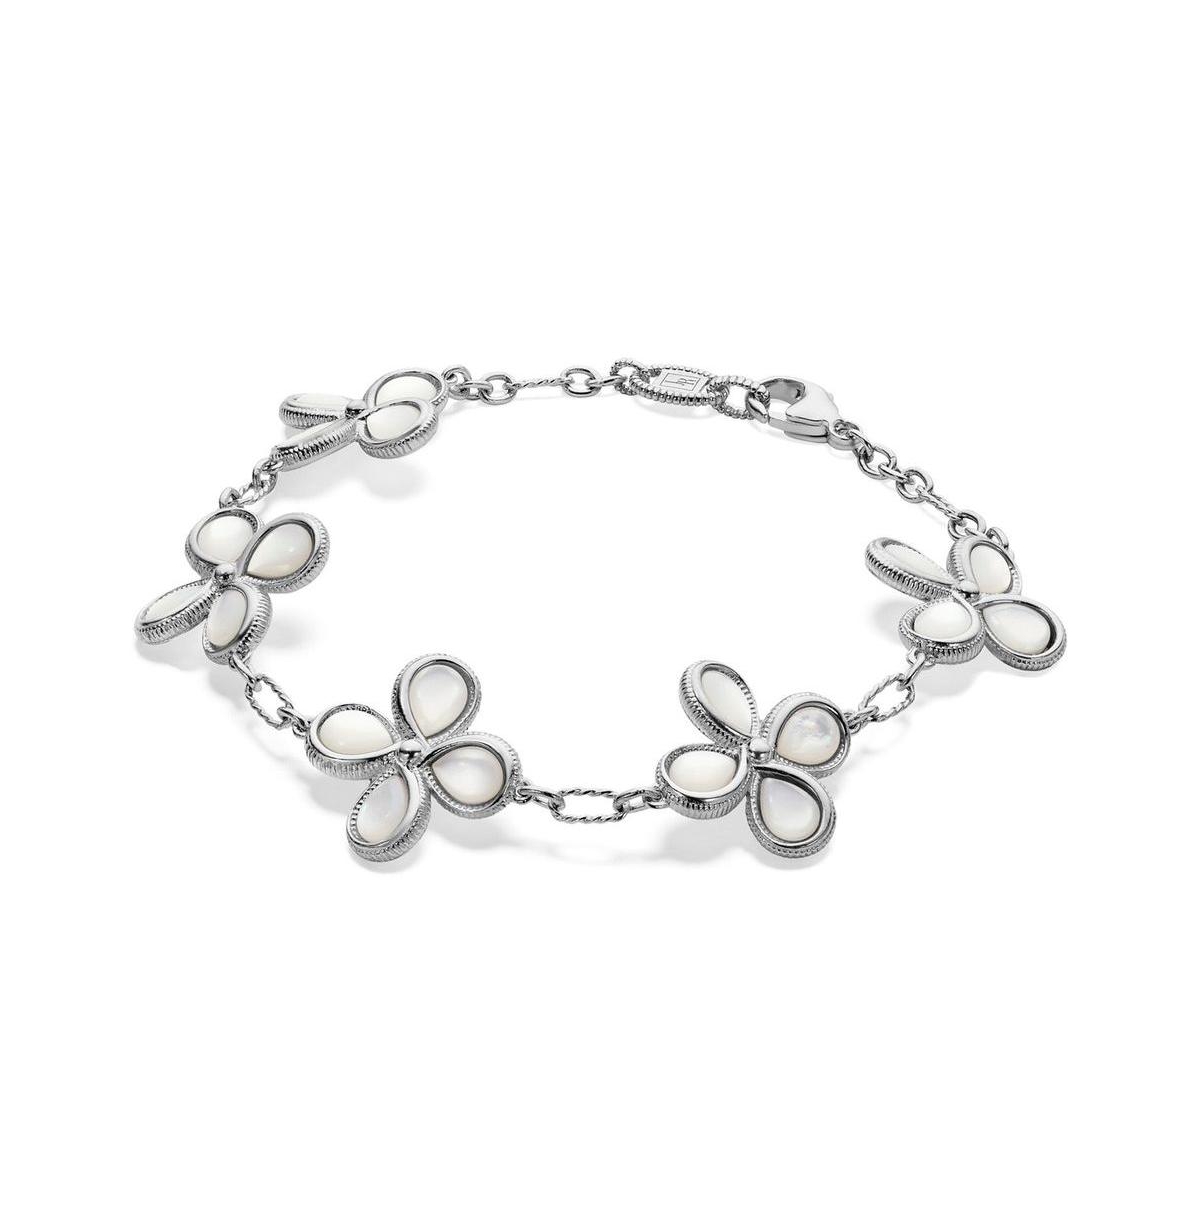 Jardin Station Bracelet with Mother of Pearl - Silver/white